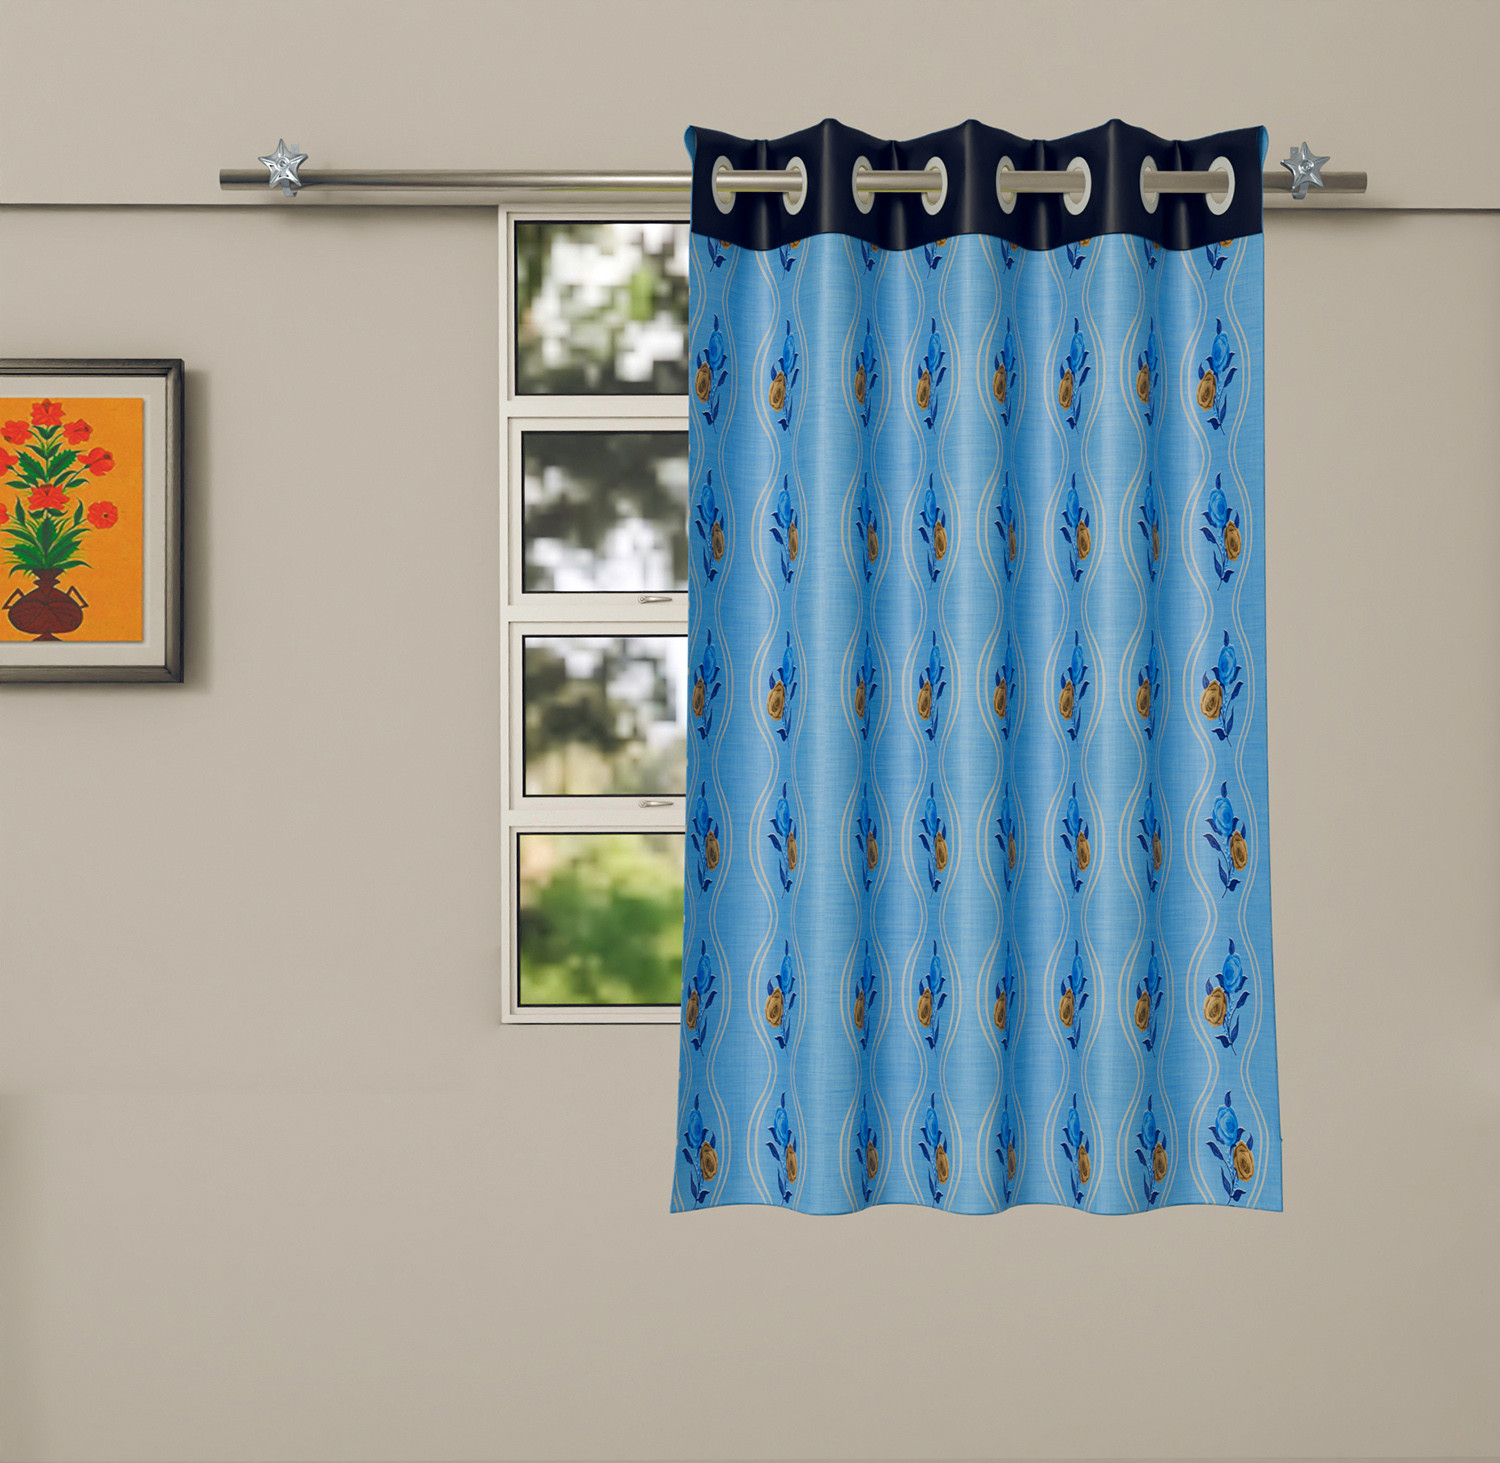 Kuber Industries Polyester Decorative 5 Feet Window Curtain | Rose Print Darkening Blackout | Drapes Curtain With 8 Eyelet For Home & Office (Sky Blue)